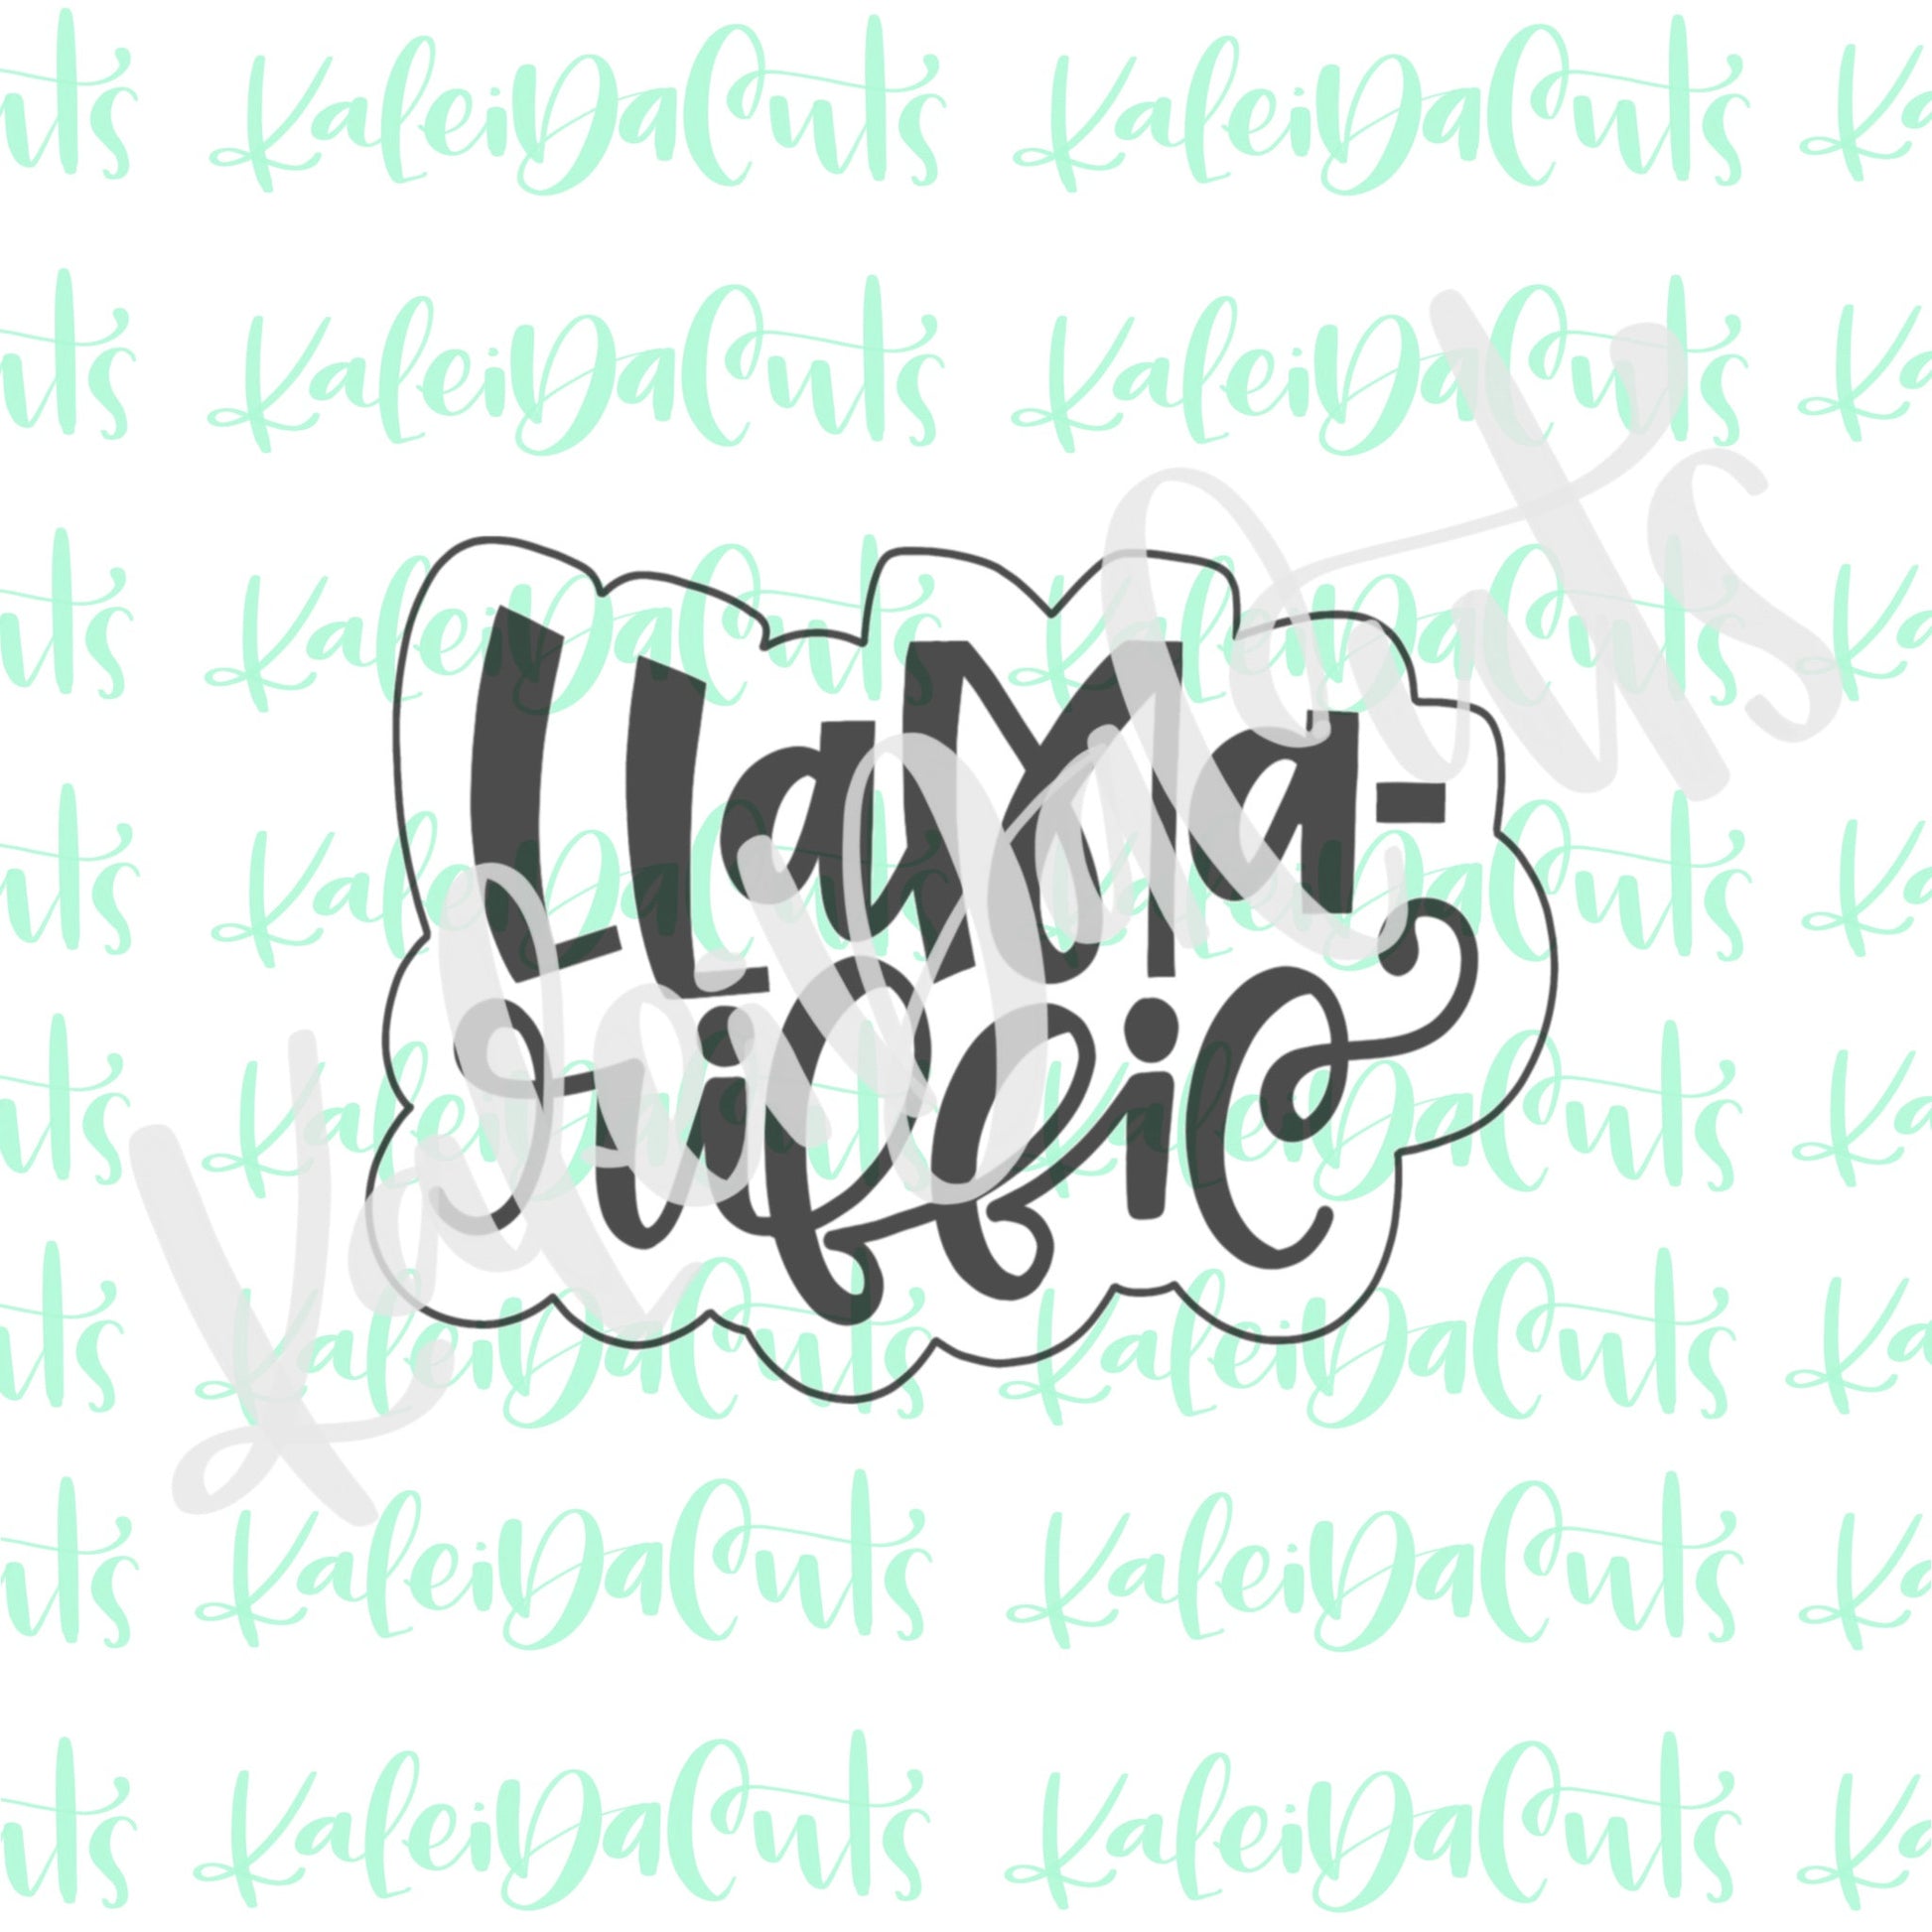 Llama-riffic Lettering Cookie Cutter